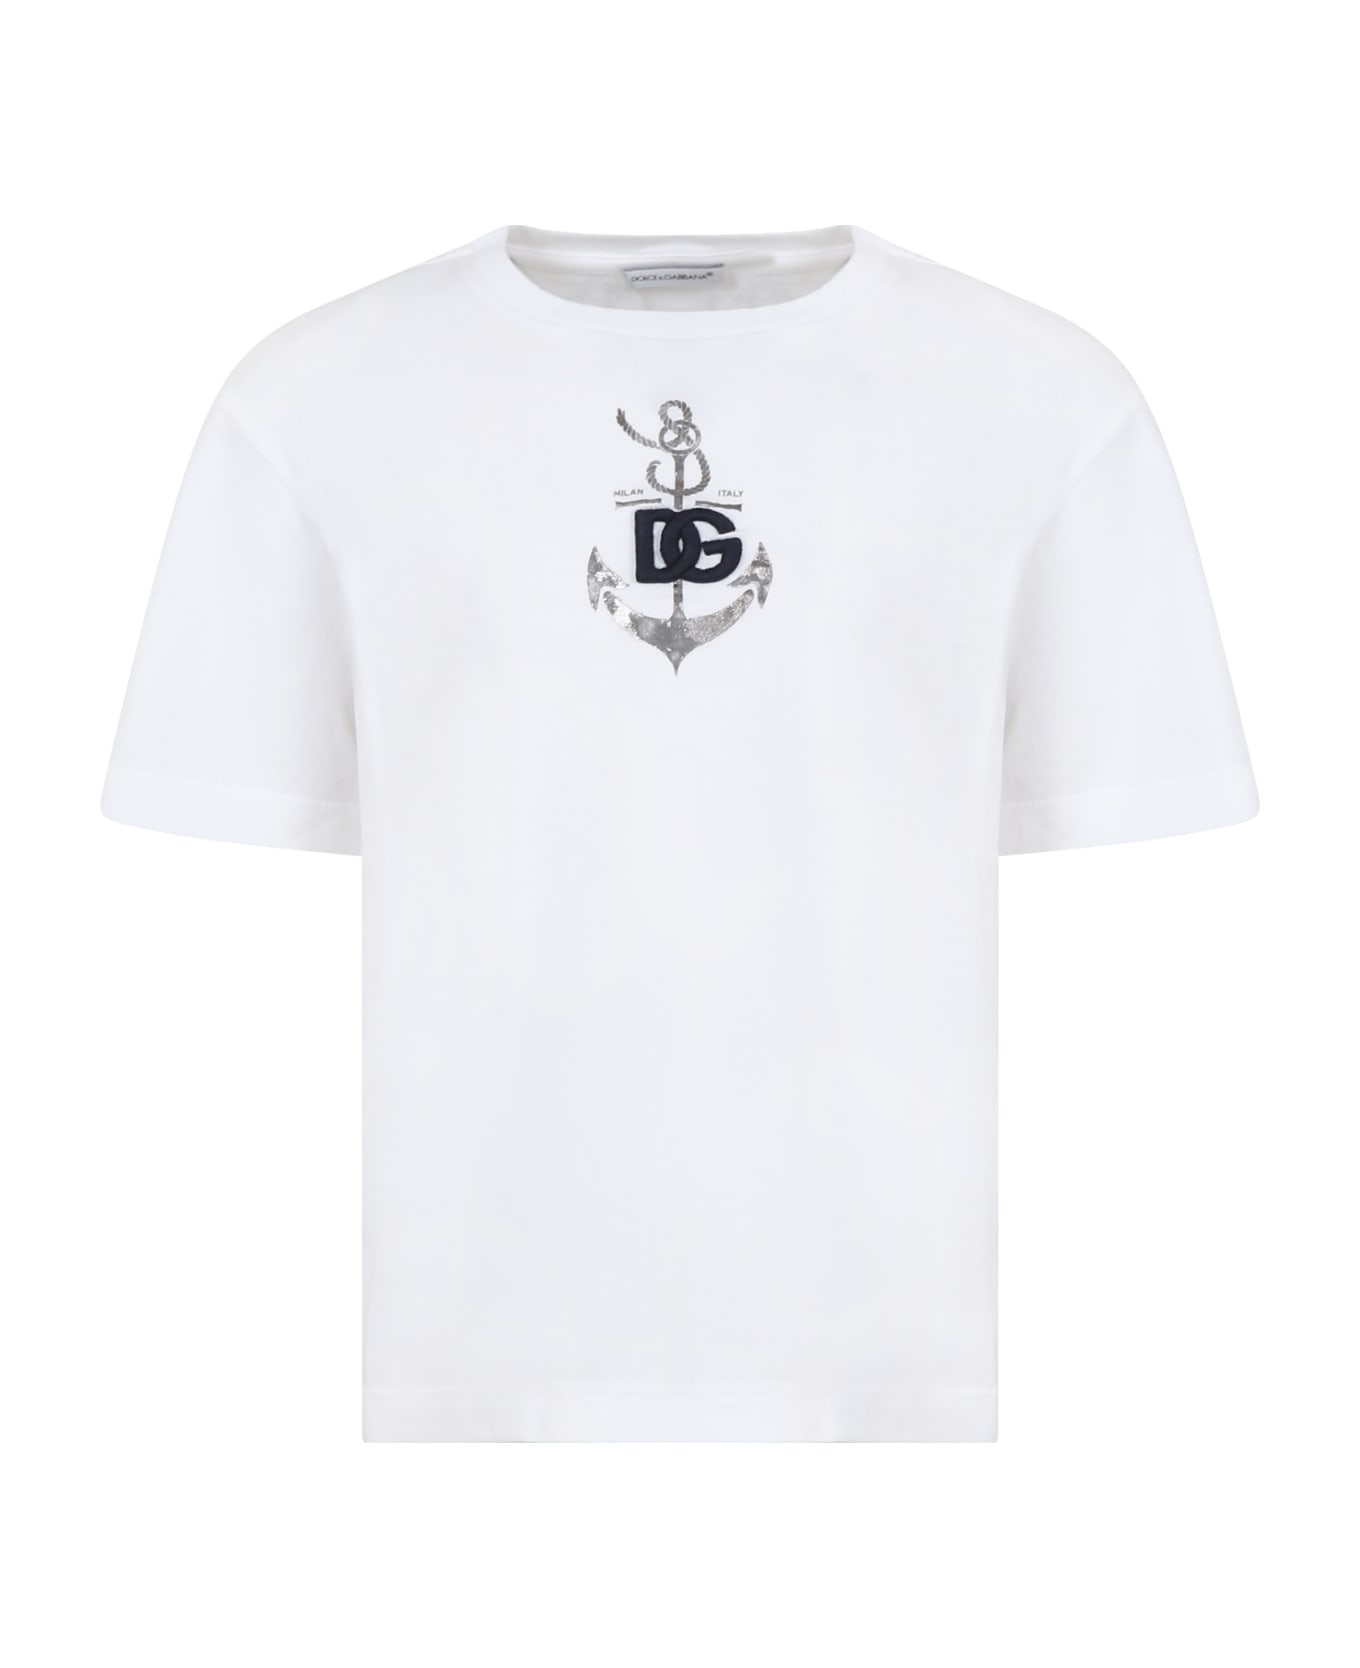 Dolce & Gabbana Whit T-shirt Shorts For Boy With Iconic Monogram - White Tシャツ＆ポロシャツ